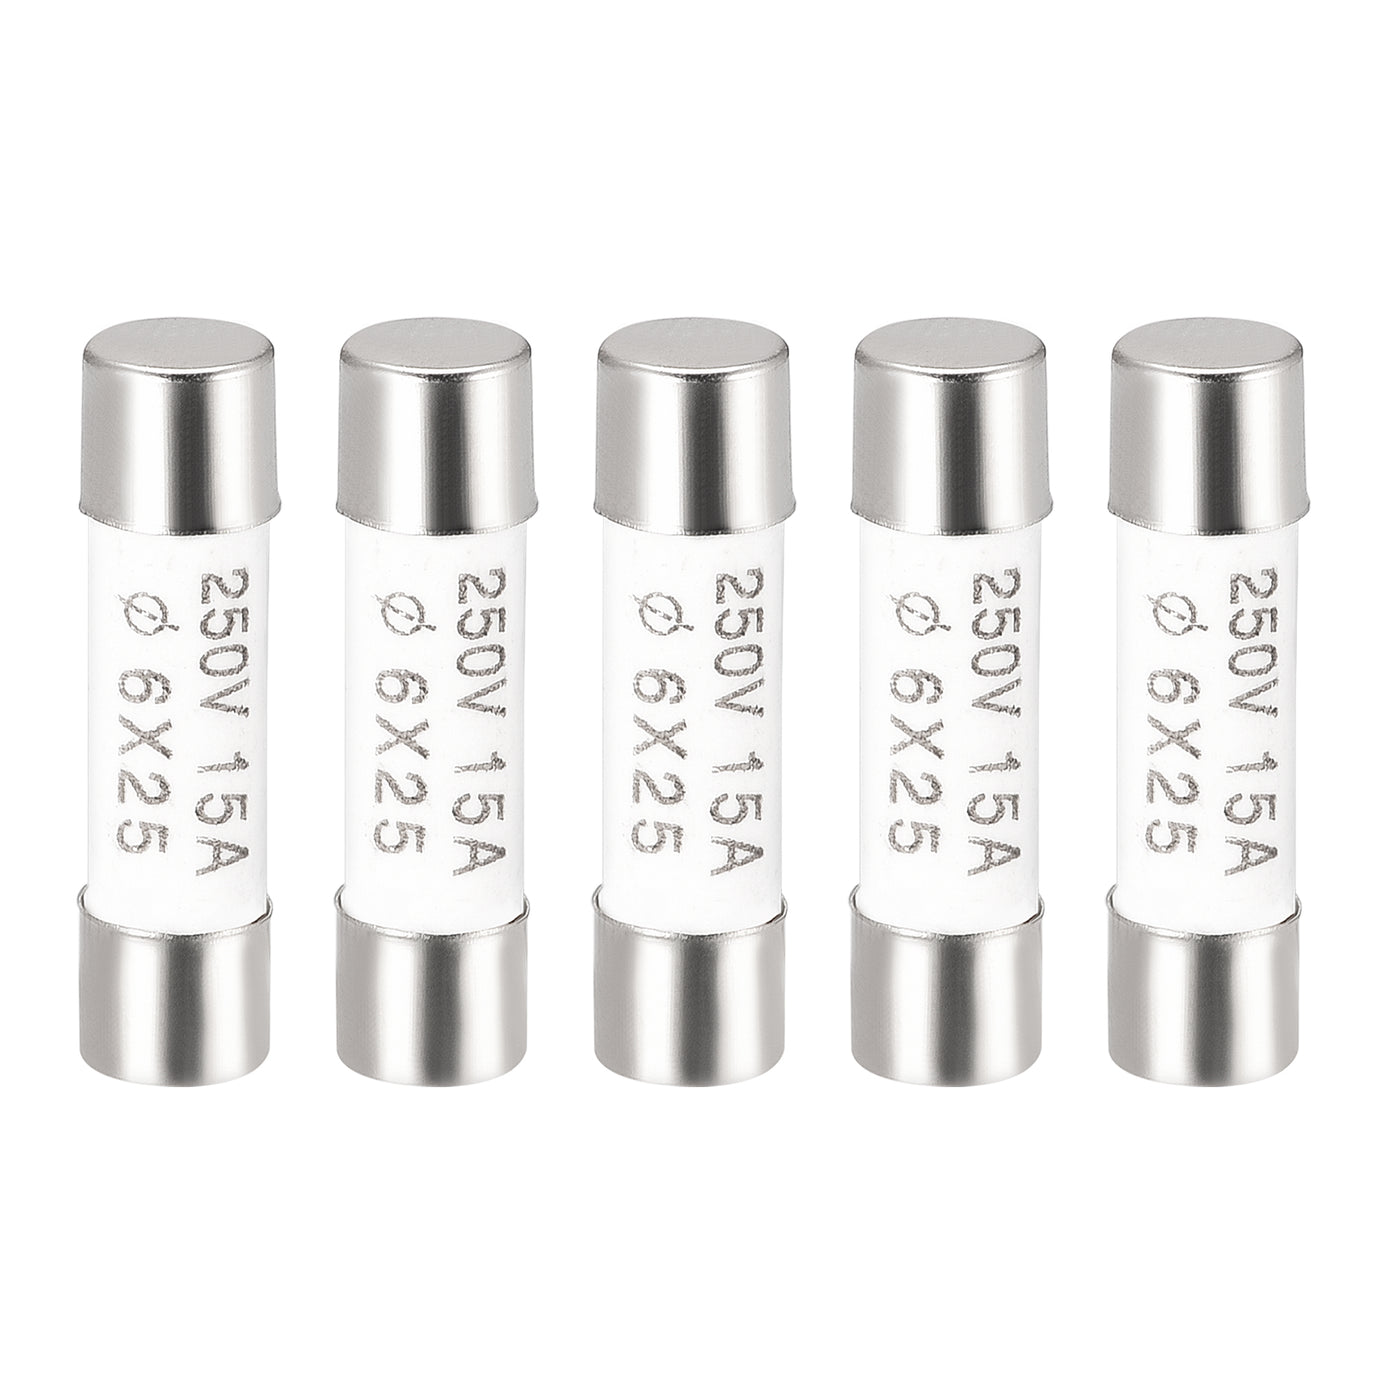 uxcell Uxcell Ceramic Cartridge Fuses 15A 250V 6x25mm Fast Blow for Energy Saving Lamp 5pcs